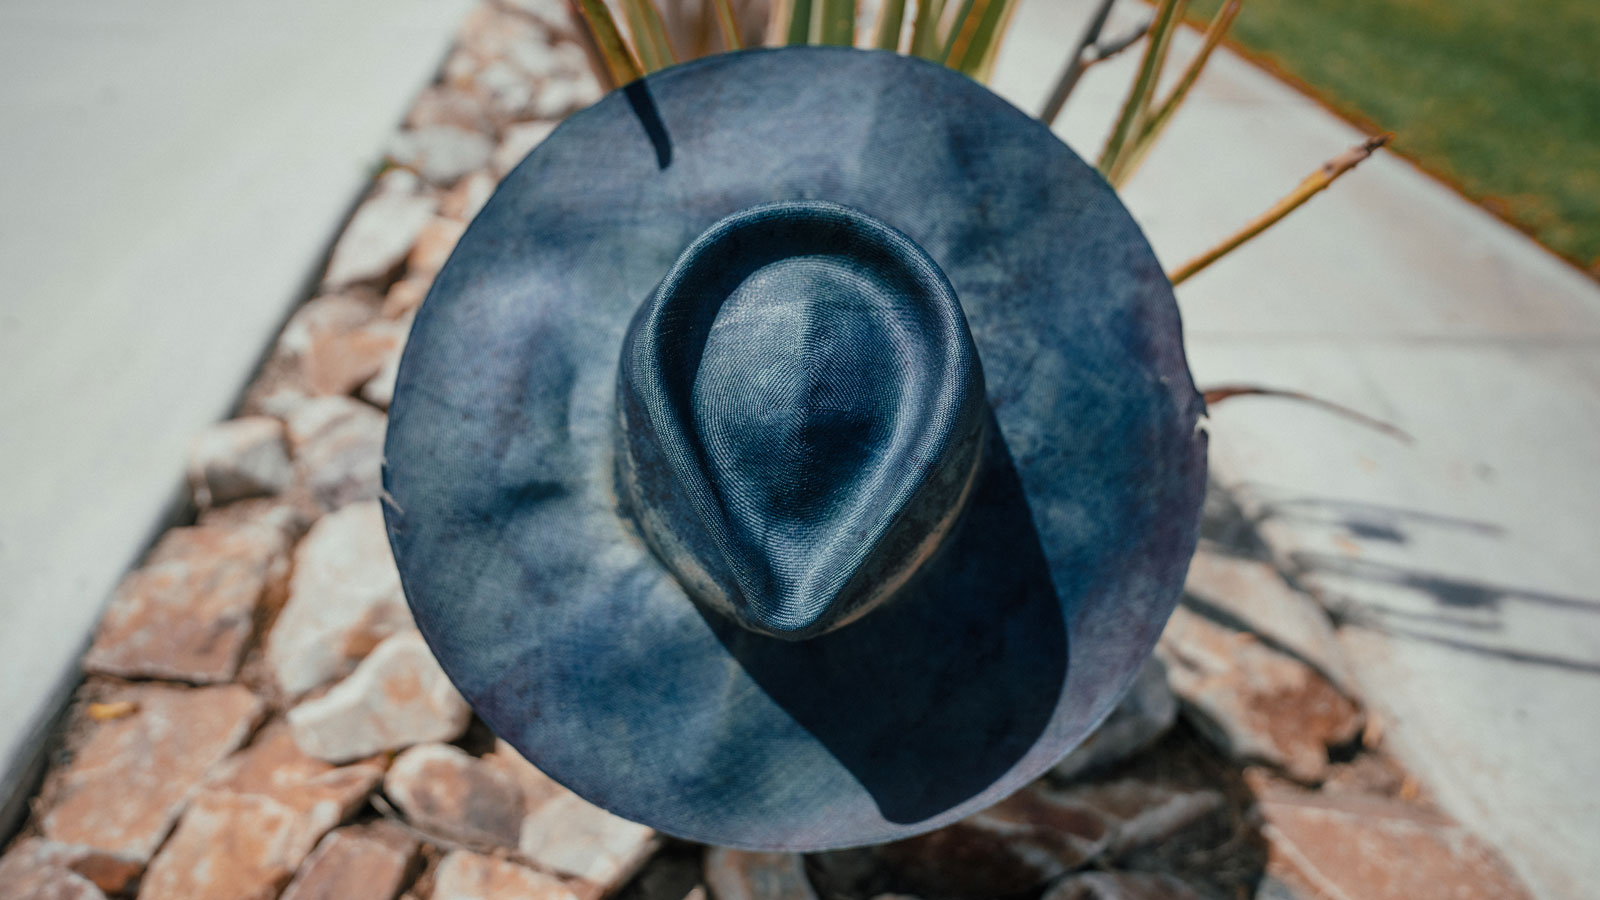 Design
Triple Indigo Hand-dyed Bacu straw. An exquisite organic piece inspired by the sediment of the earth.
Material
Triple Indigo hand-dyed Bacu straw. Natural dyeing minimizes the harmful effects on the surrounding environment. Our custom hats are hand-dyed by using plant and vegetable-based pigments.
Specifications
No two pieces are exactly alike, making each work one of a kind. Due to the nature of our products and their process, some variance and character is to be expected. Handmade in our atelier in NYC. Please allow 2-4 weeks to custom make this special piece.